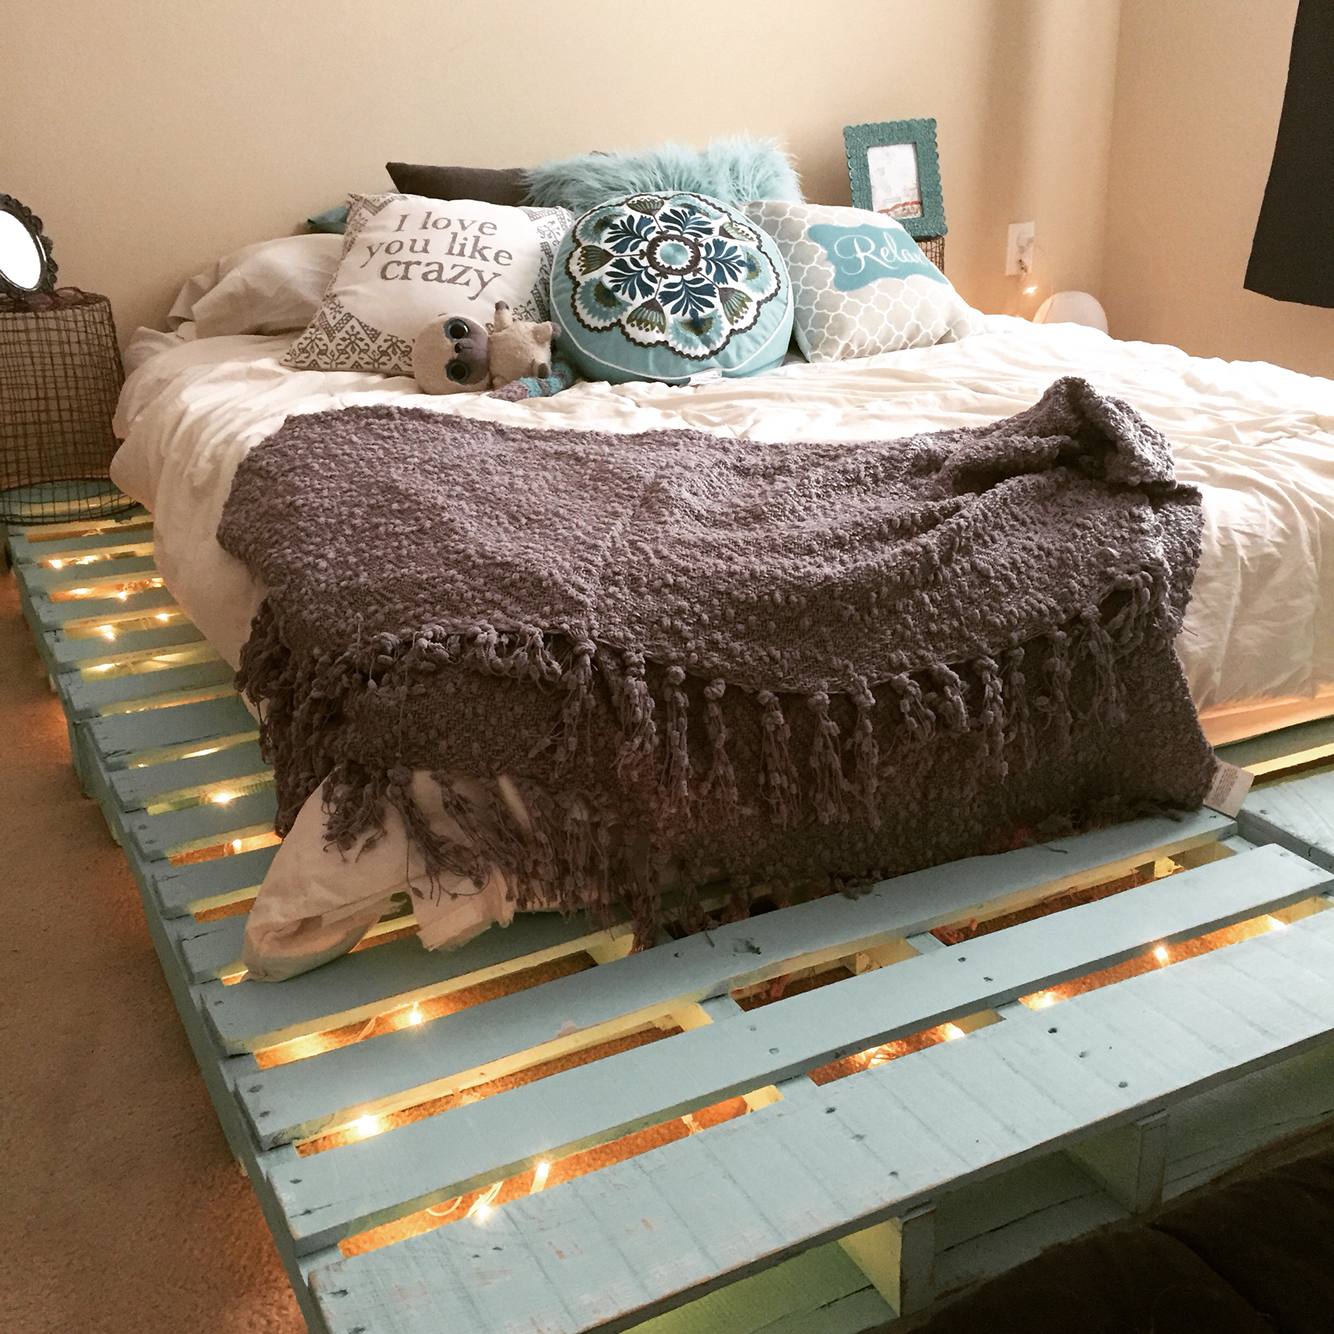 Models And Interior Decor Ideas Of The Comfiest Pallet Beds